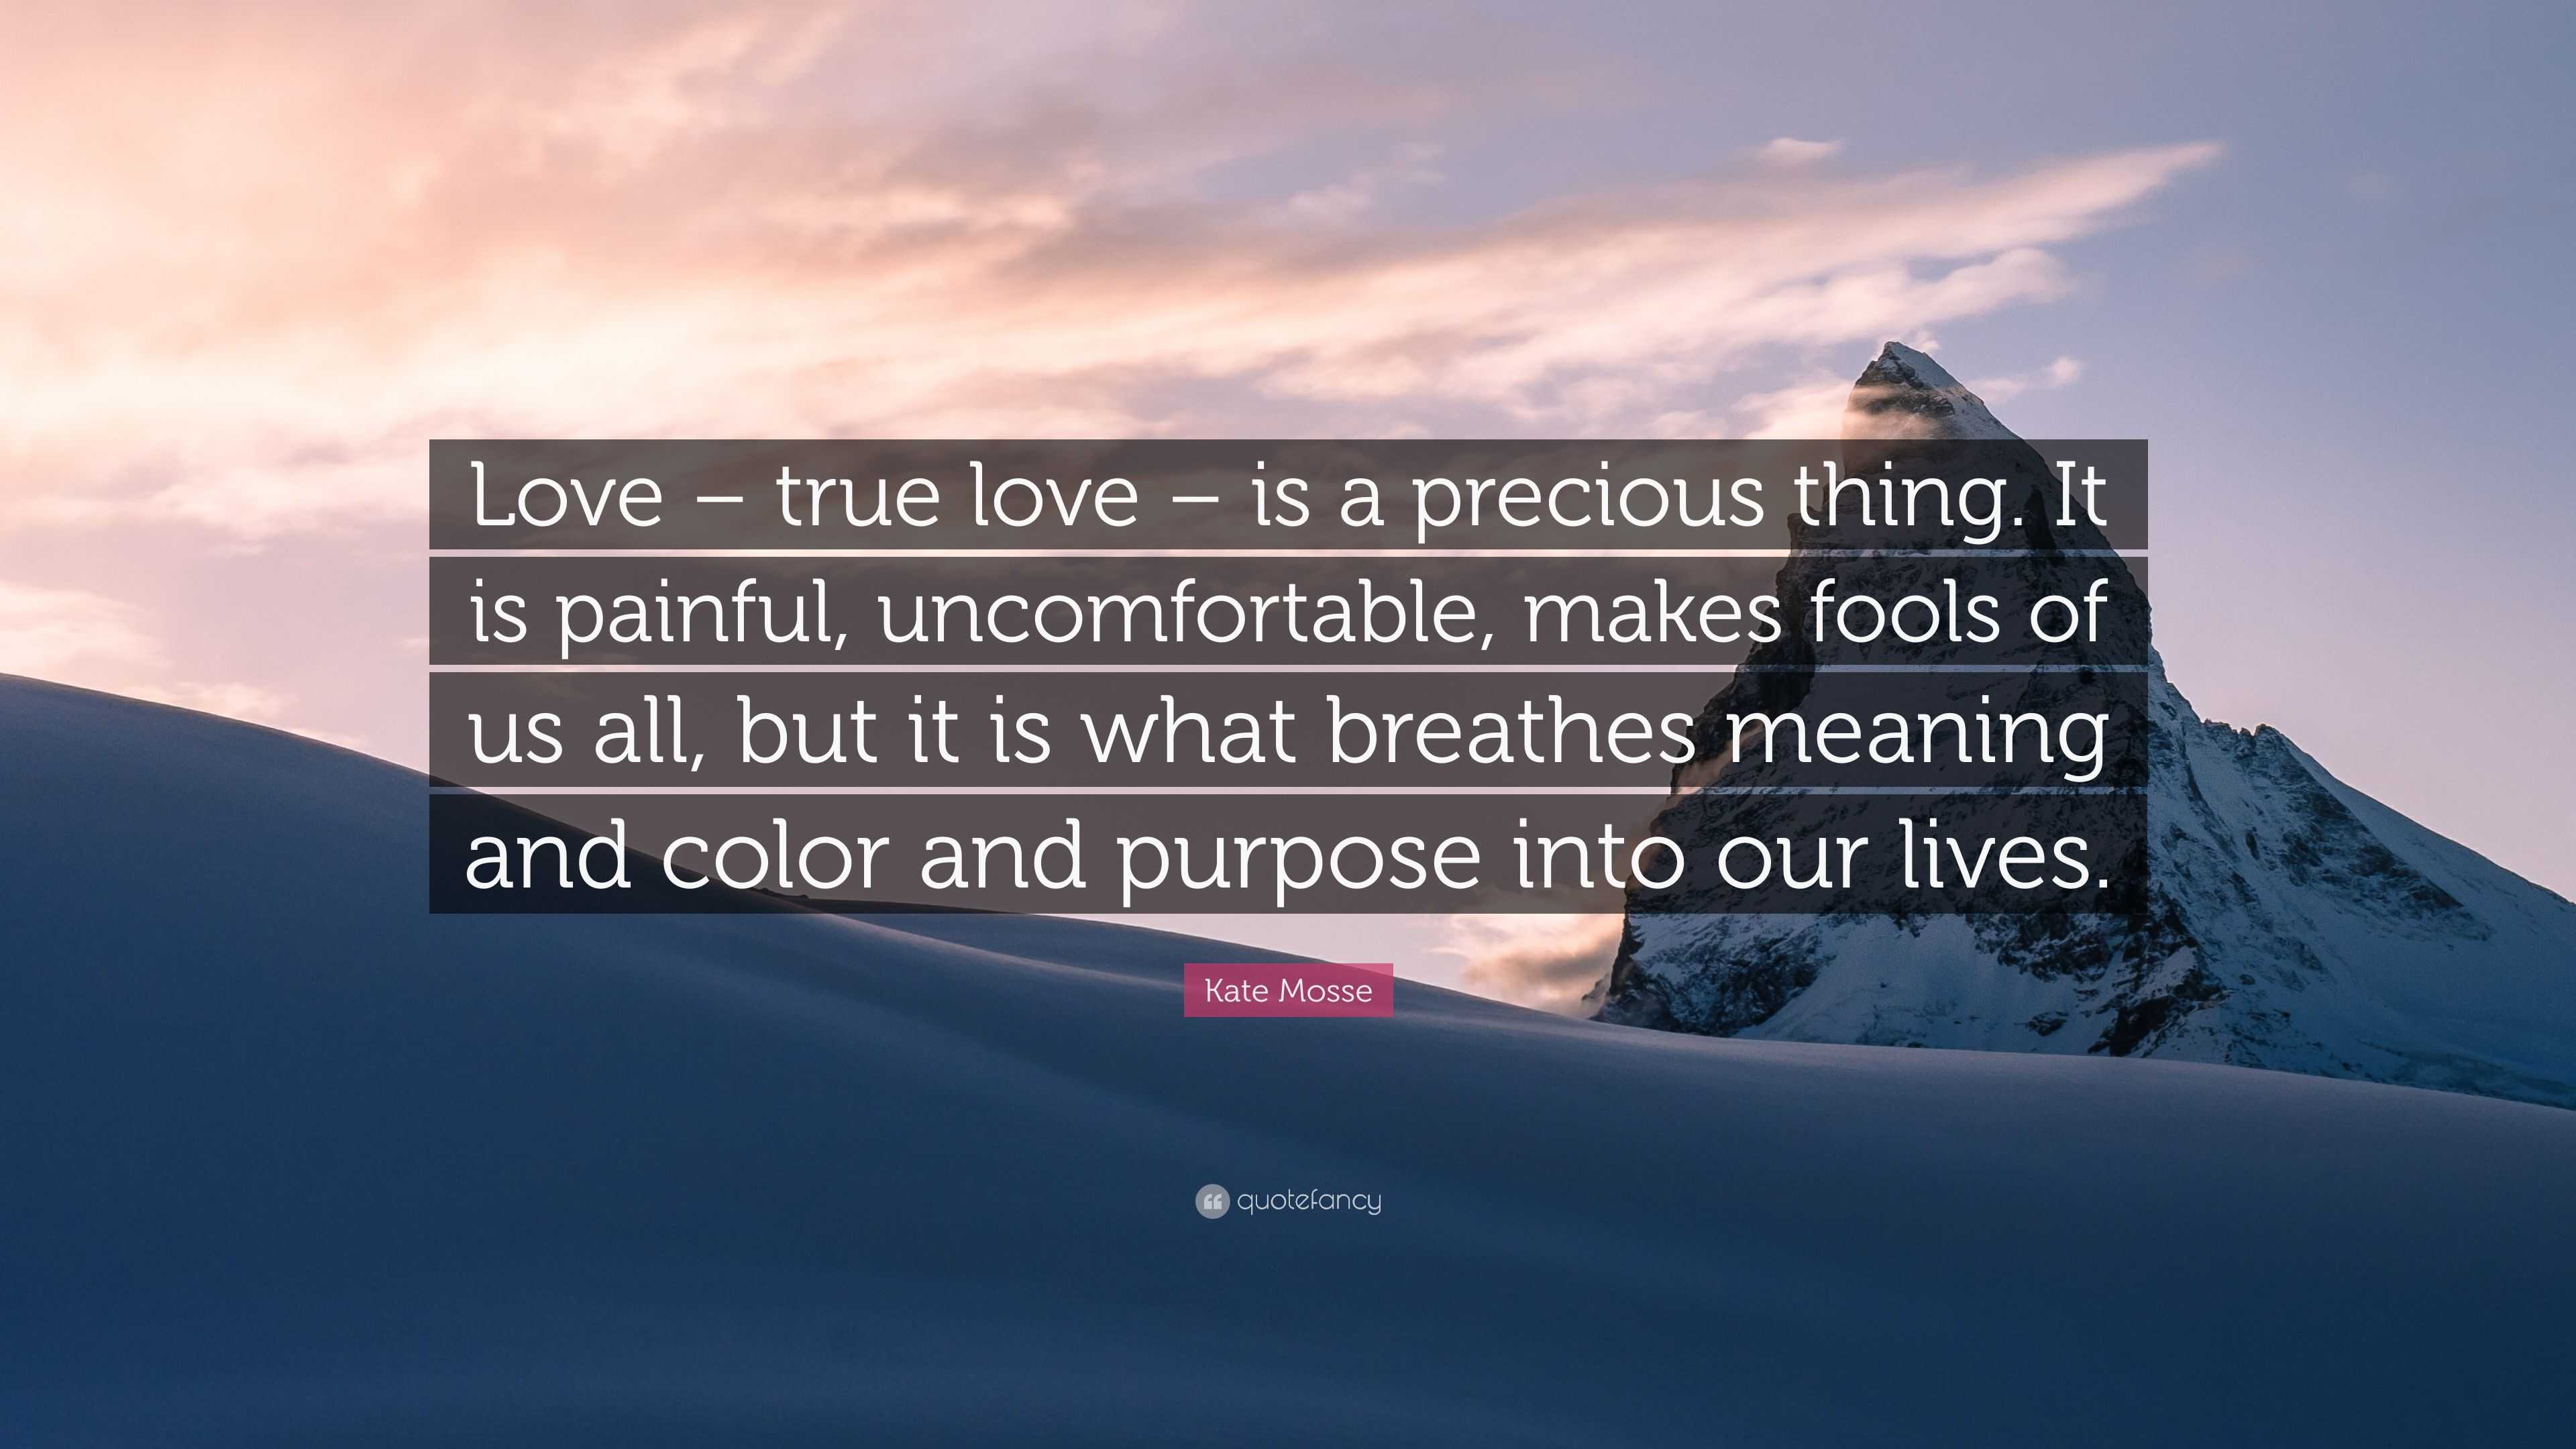  What is the meaning of True Love?